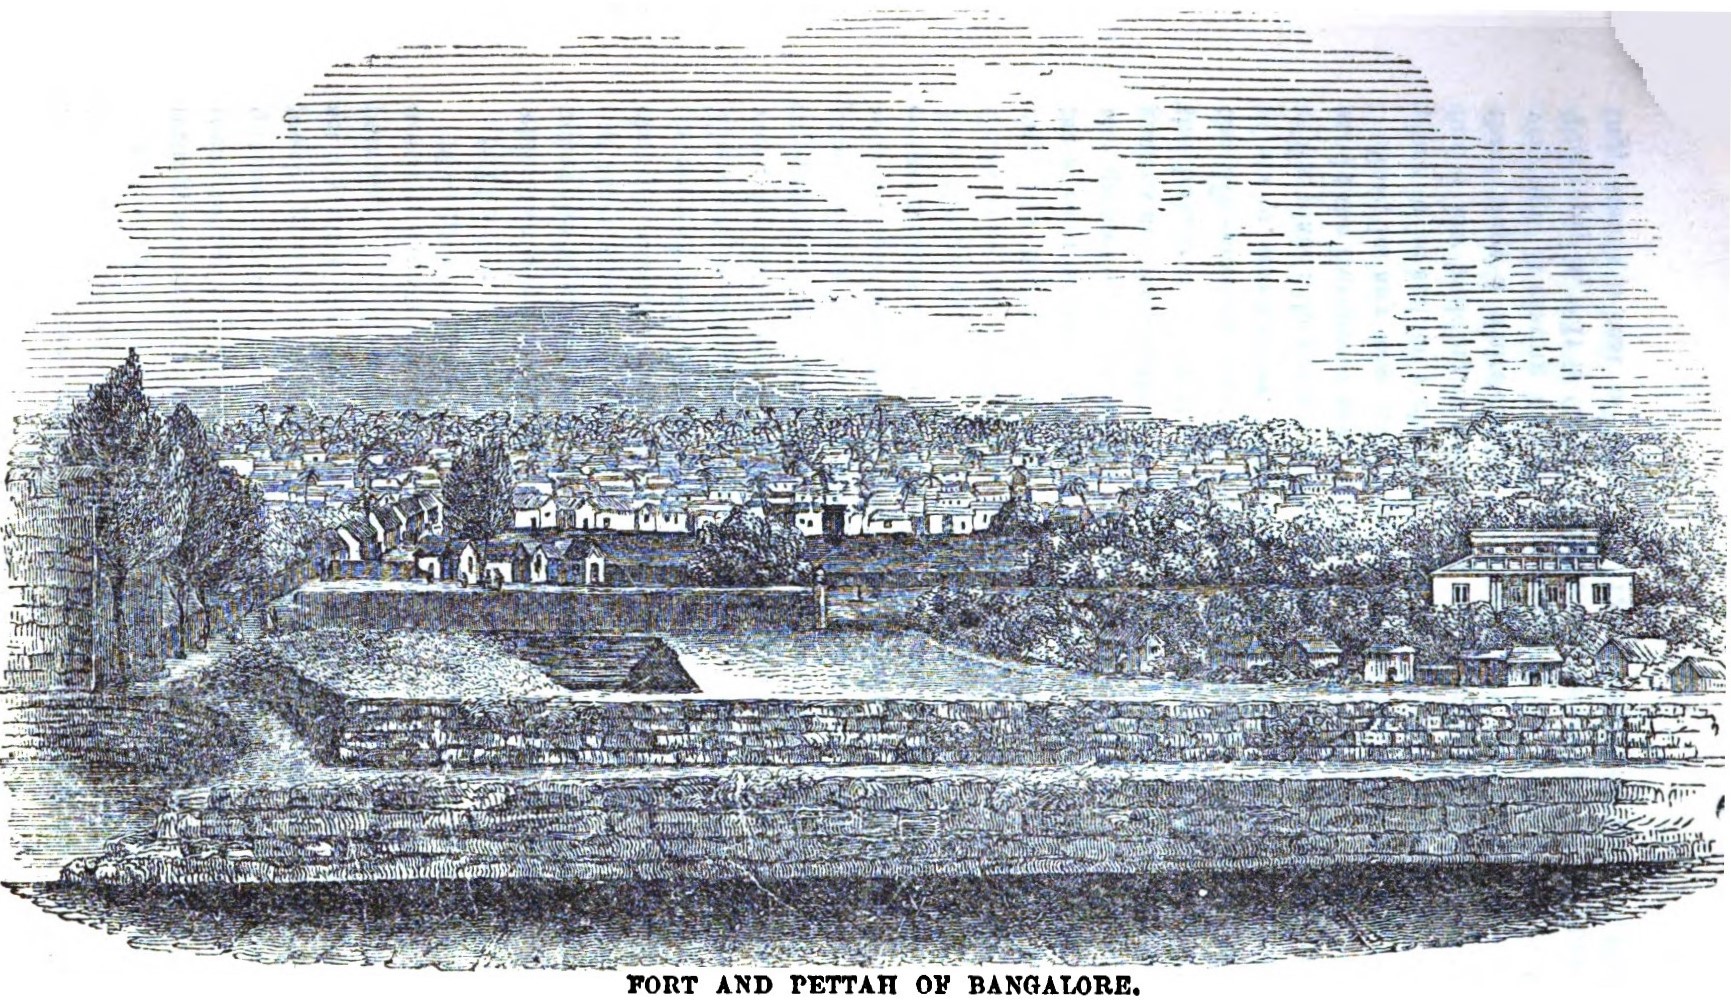 Fort and Pettah of Bangalore, courtesy :Wiki